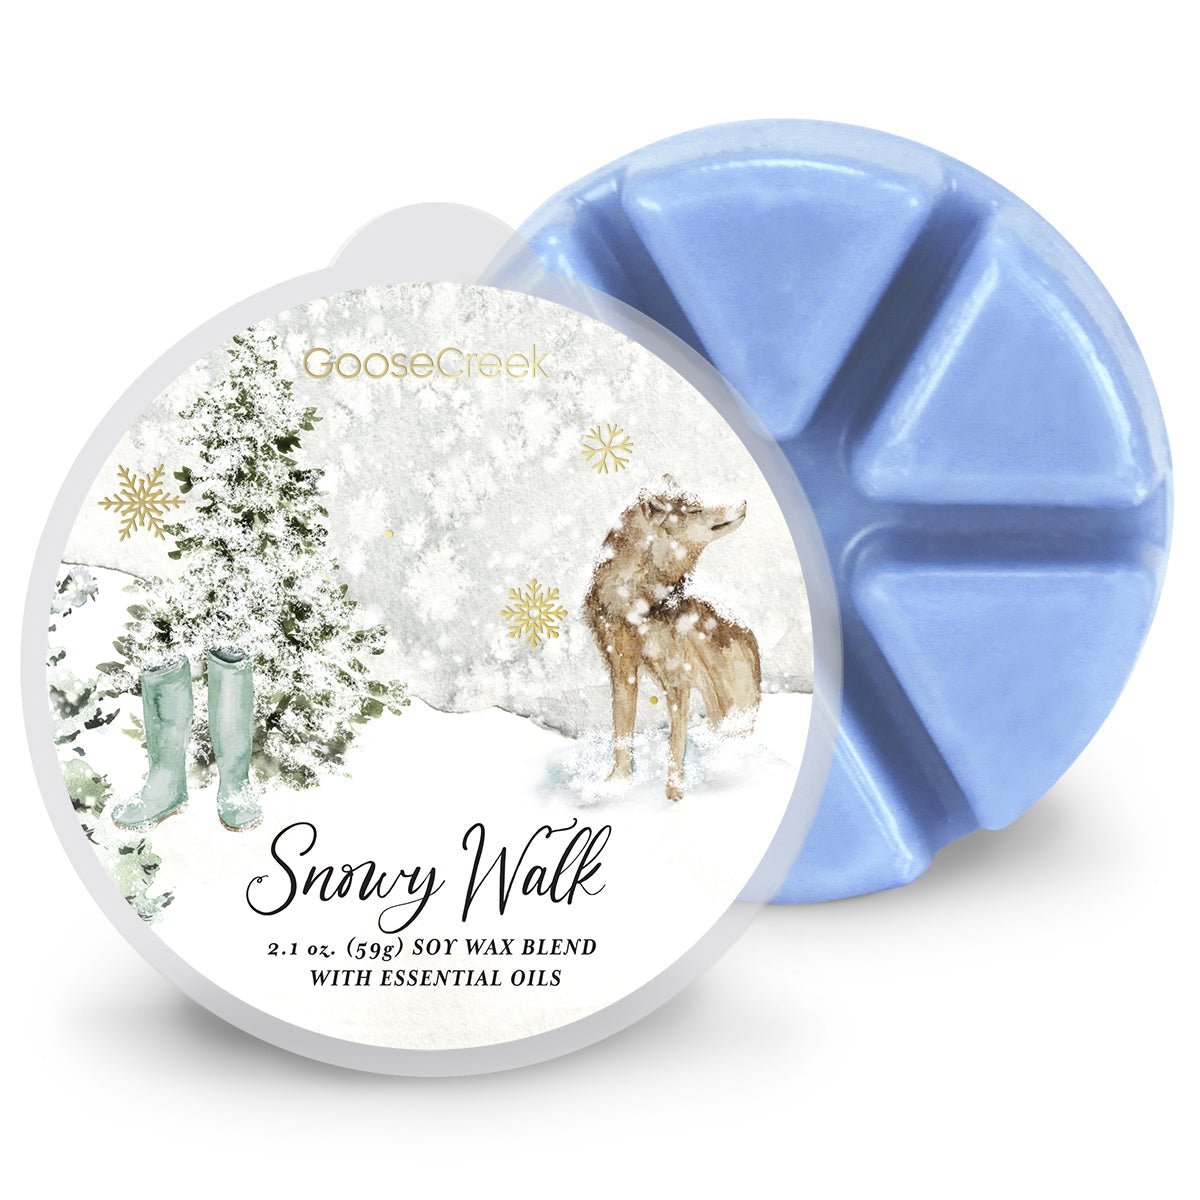 Soothing Grapefruit and Eucalyptus Wax Melt - White Water Springs – Goose  Creek Candle